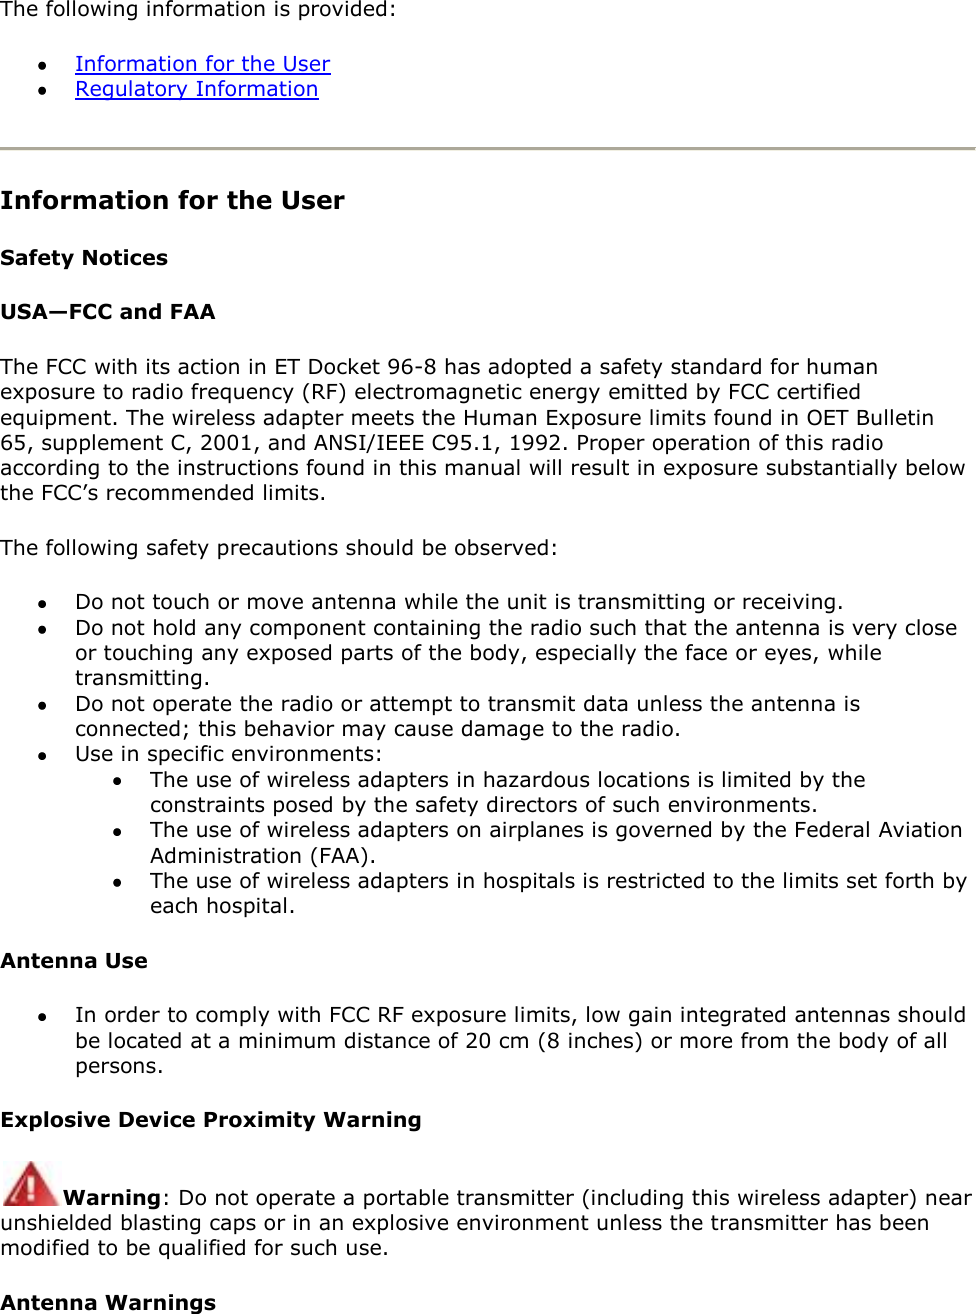 The following information is provided:   Information for the User  Regulatory Information  Information for the User Safety Notices USA—FCC and FAA The FCC with its action in ET Docket 96-8 has adopted a safety standard for human exposure to radio frequency (RF) electromagnetic energy emitted by FCC certified equipment. The wireless adapter meets the Human Exposure limits found in OET Bulletin 65, supplement C, 2001, and ANSI/IEEE C95.1, 1992. Proper operation of this radio according to the instructions found in this manual will result in exposure substantially below the FCC’s recommended limits. The following safety precautions should be observed:  Do not touch or move antenna while the unit is transmitting or receiving.  Do not hold any component containing the radio such that the antenna is very close or touching any exposed parts of the body, especially the face or eyes, while transmitting.  Do not operate the radio or attempt to transmit data unless the antenna is connected; this behavior may cause damage to the radio.  Use in specific environments:   The use of wireless adapters in hazardous locations is limited by the constraints posed by the safety directors of such environments.  The use of wireless adapters on airplanes is governed by the Federal Aviation Administration (FAA).  The use of wireless adapters in hospitals is restricted to the limits set forth by each hospital. Antenna Use  In order to comply with FCC RF exposure limits, low gain integrated antennas should be located at a minimum distance of 20 cm (8 inches) or more from the body of all persons. Explosive Device Proximity Warning Warning: Do not operate a portable transmitter (including this wireless adapter) near unshielded blasting caps or in an explosive environment unless the transmitter has been modified to be qualified for such use. Antenna Warnings 